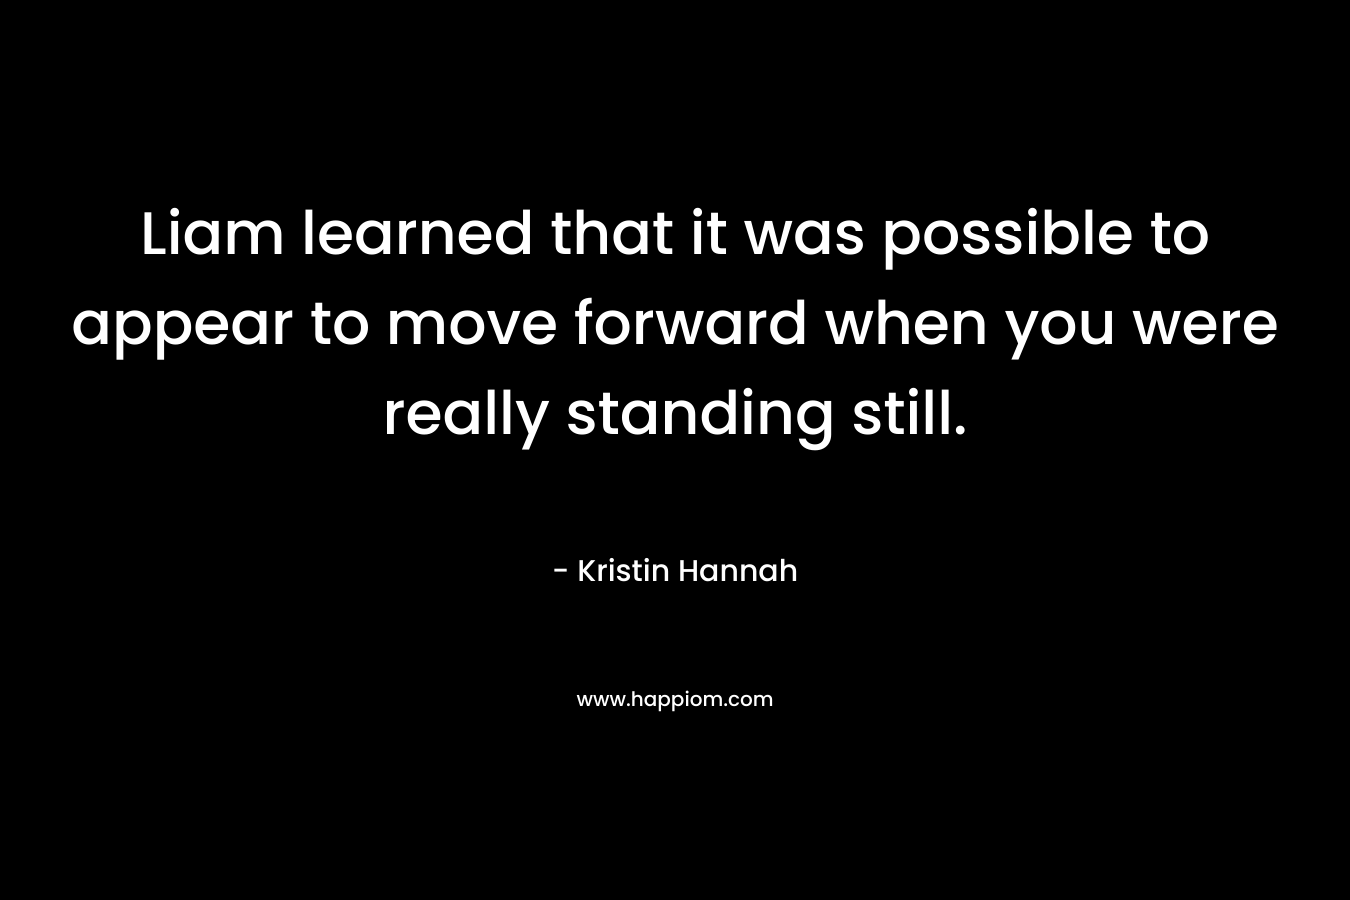 Liam learned that it was possible to appear to move forward when you were really standing still. – Kristin Hannah